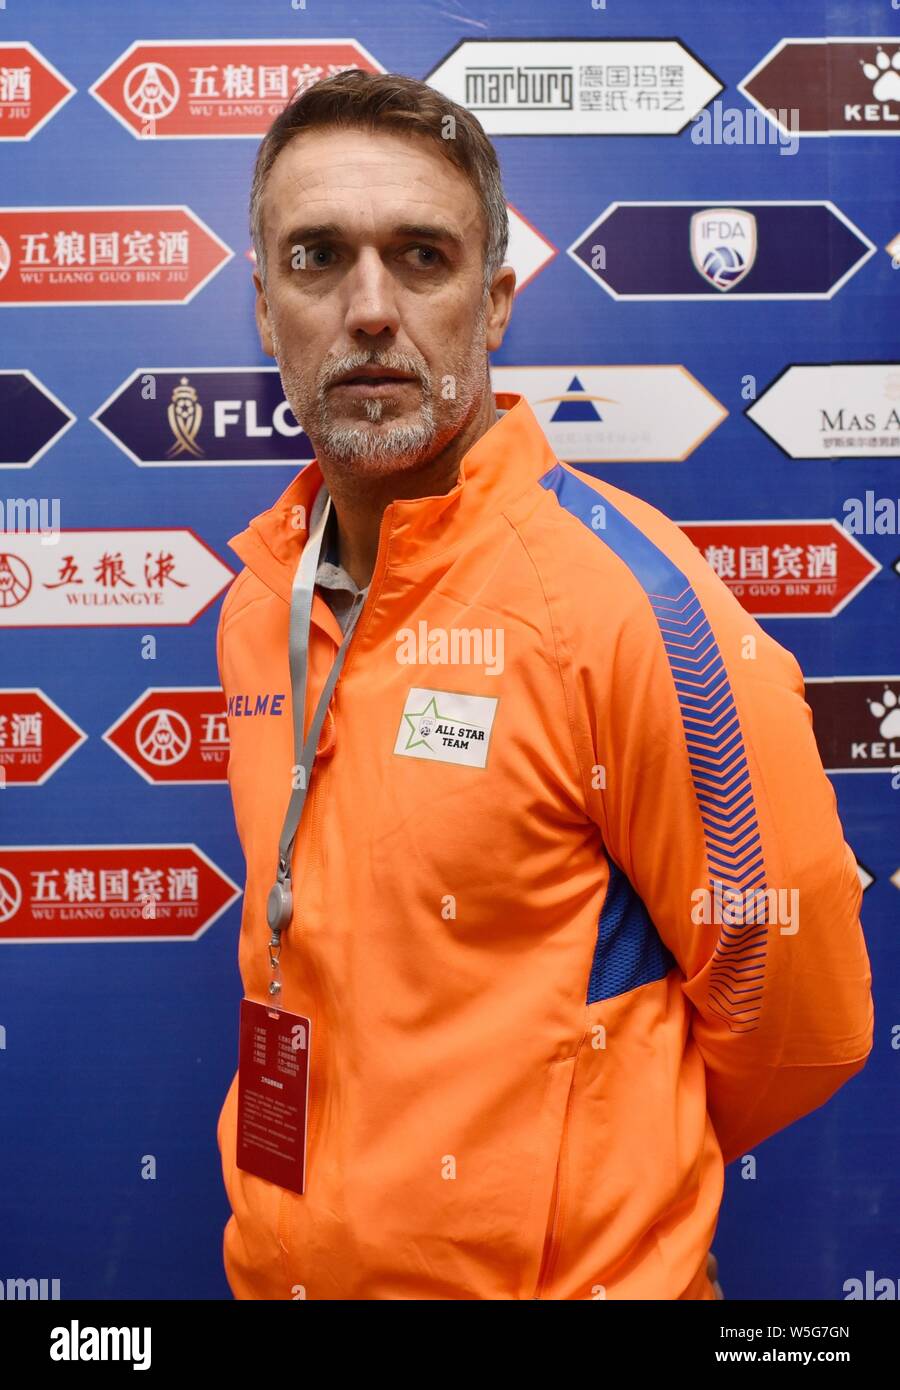 Argentine football star Gabriel Batistuta attends a press conference for the China game of the IFDA World Legends Series - Football Legends Cup 2019 i Stock Photo